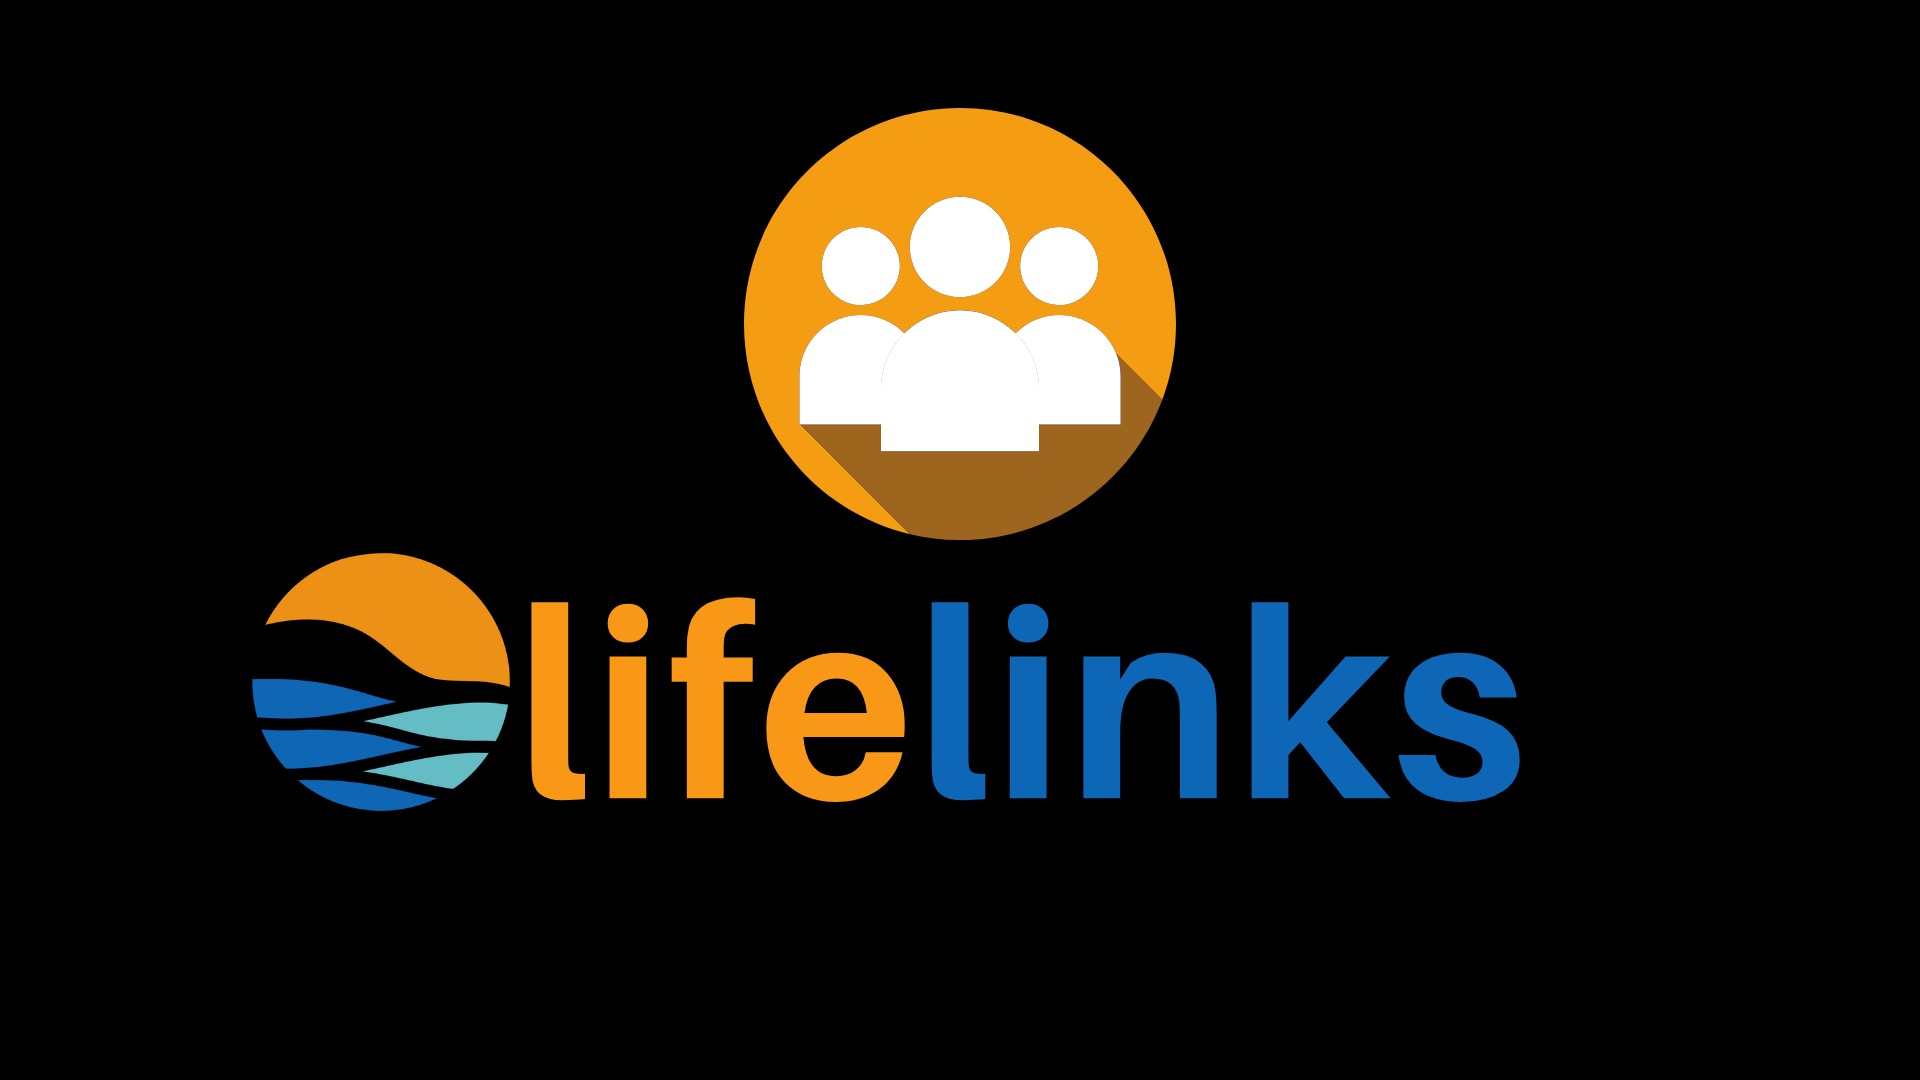 Attend Life Links